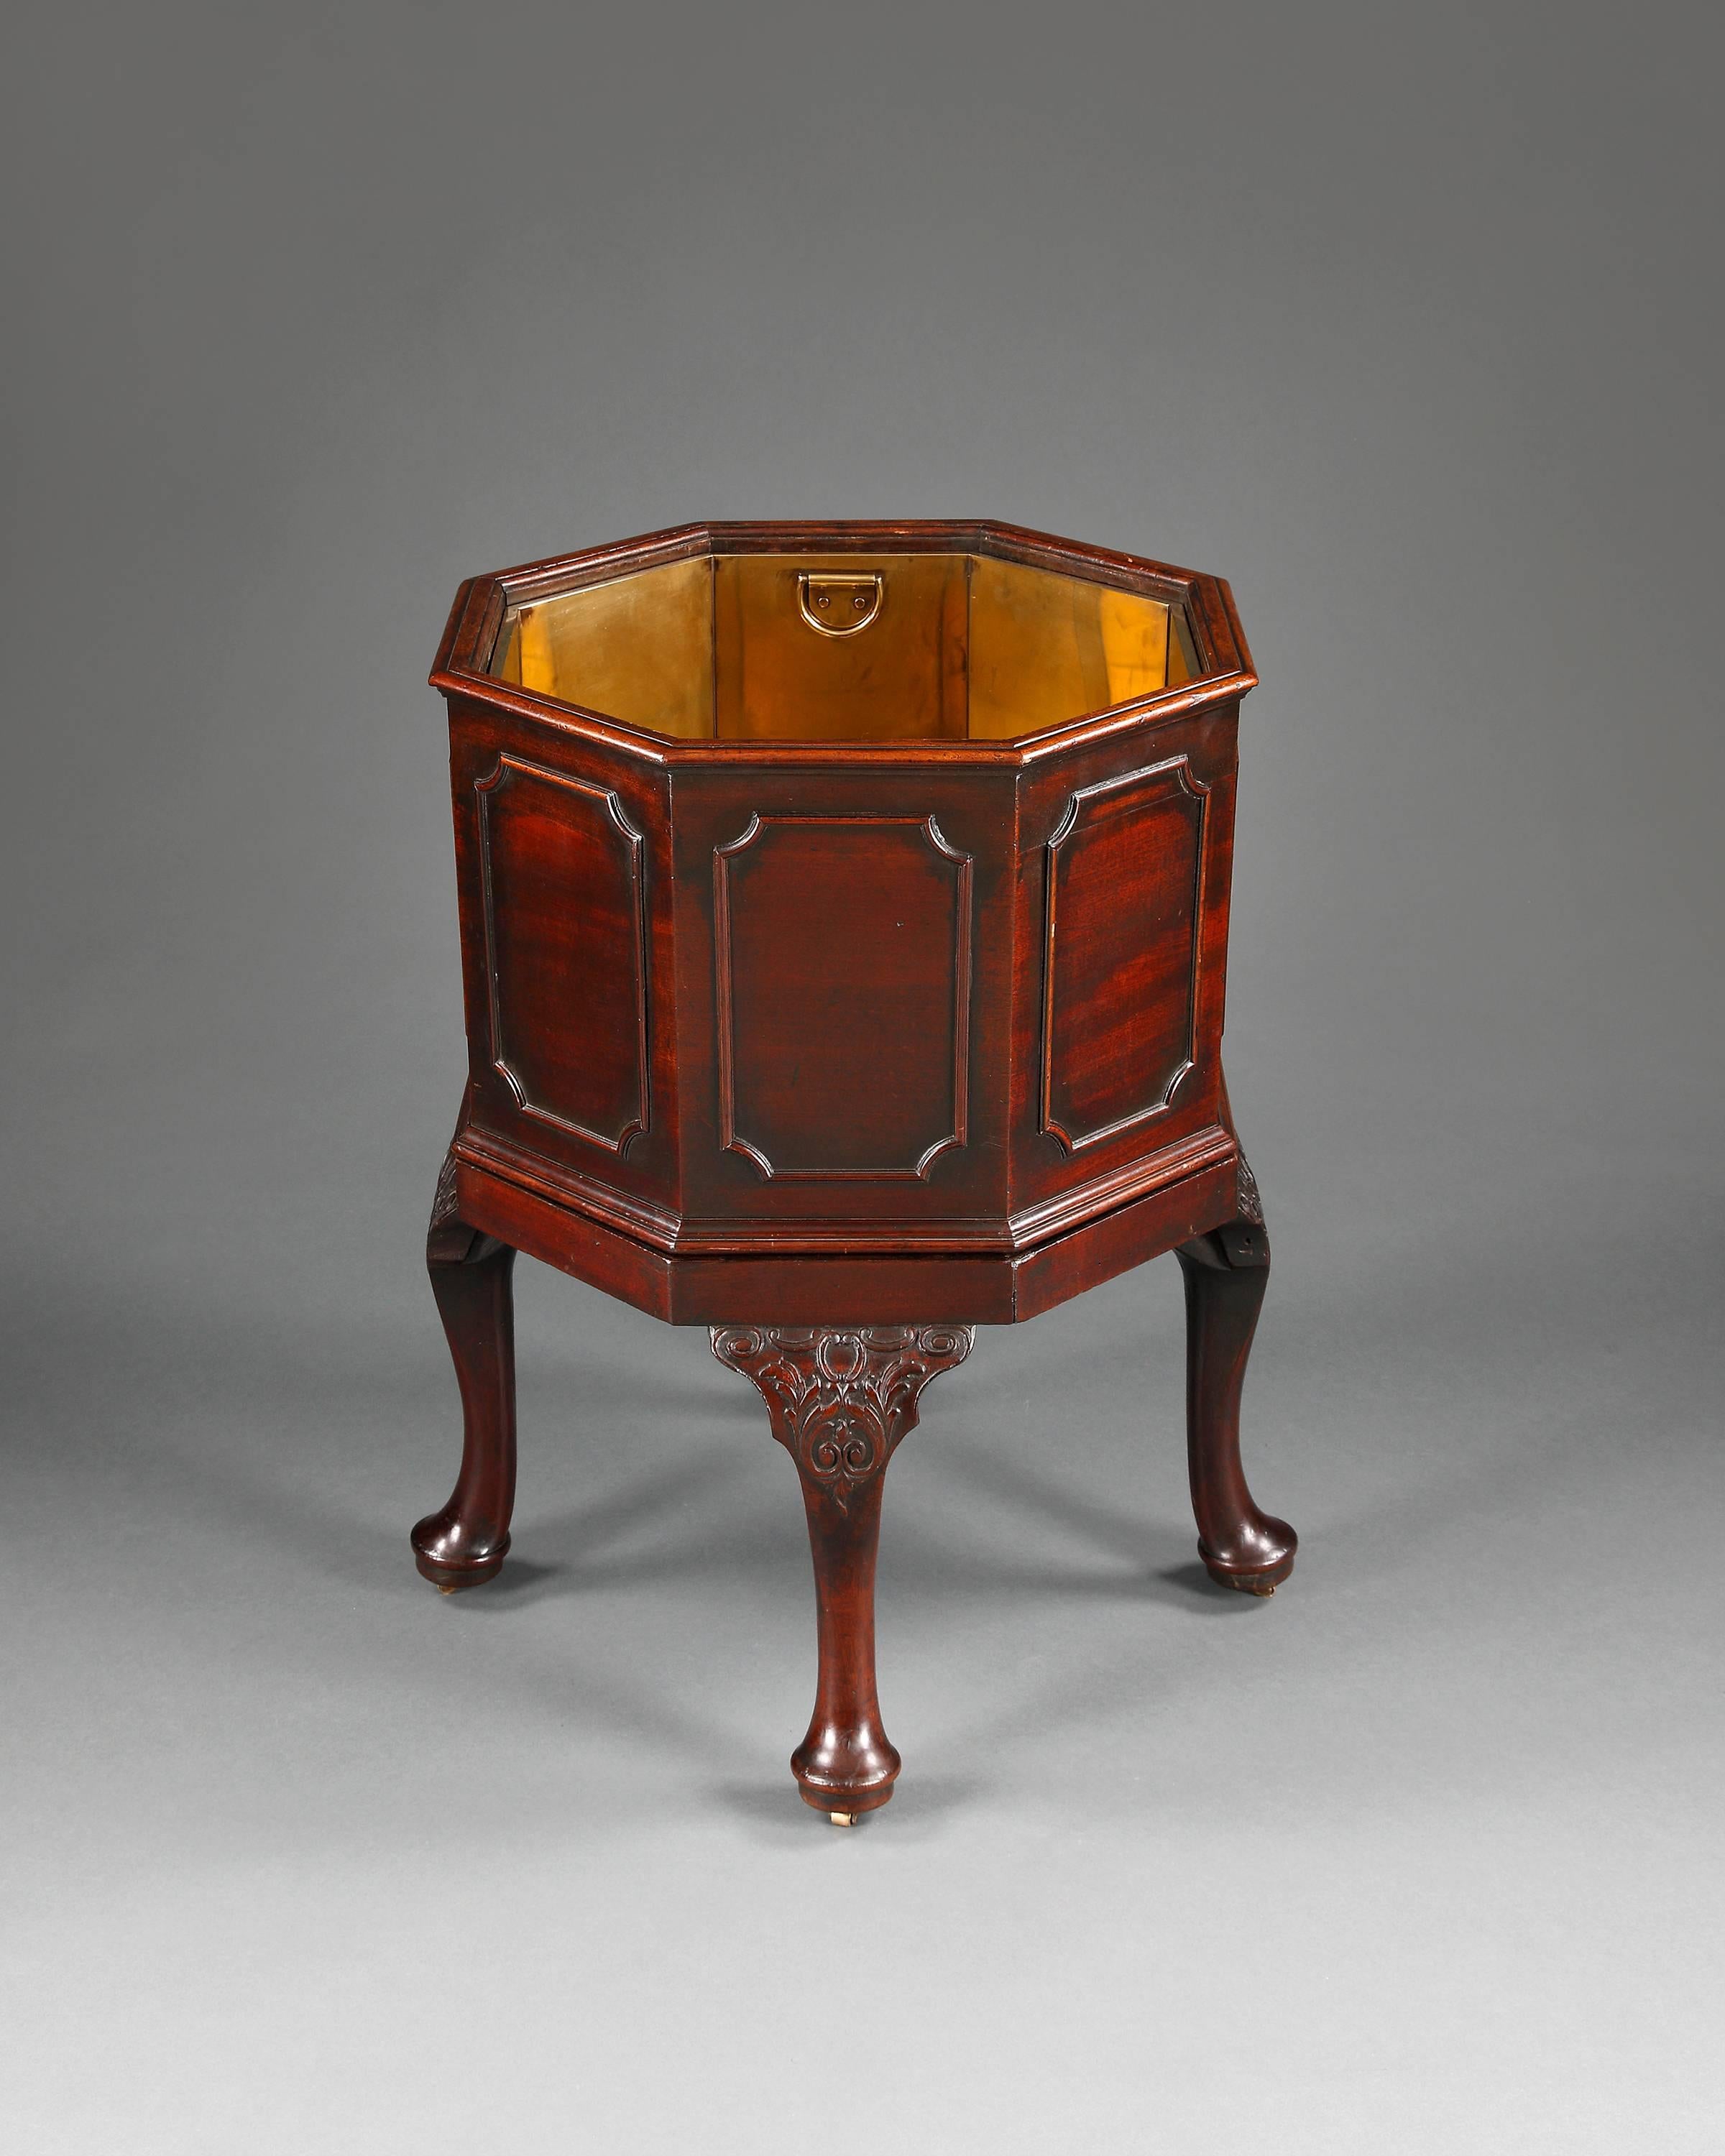 A fine example of Georgian cabinetmaking. The mahogany octagonal planter is in two parts. The upper section with a later brass liner and having rectangular shaped moulded panels with concave corners. This rests on the base of four cabriole legs each